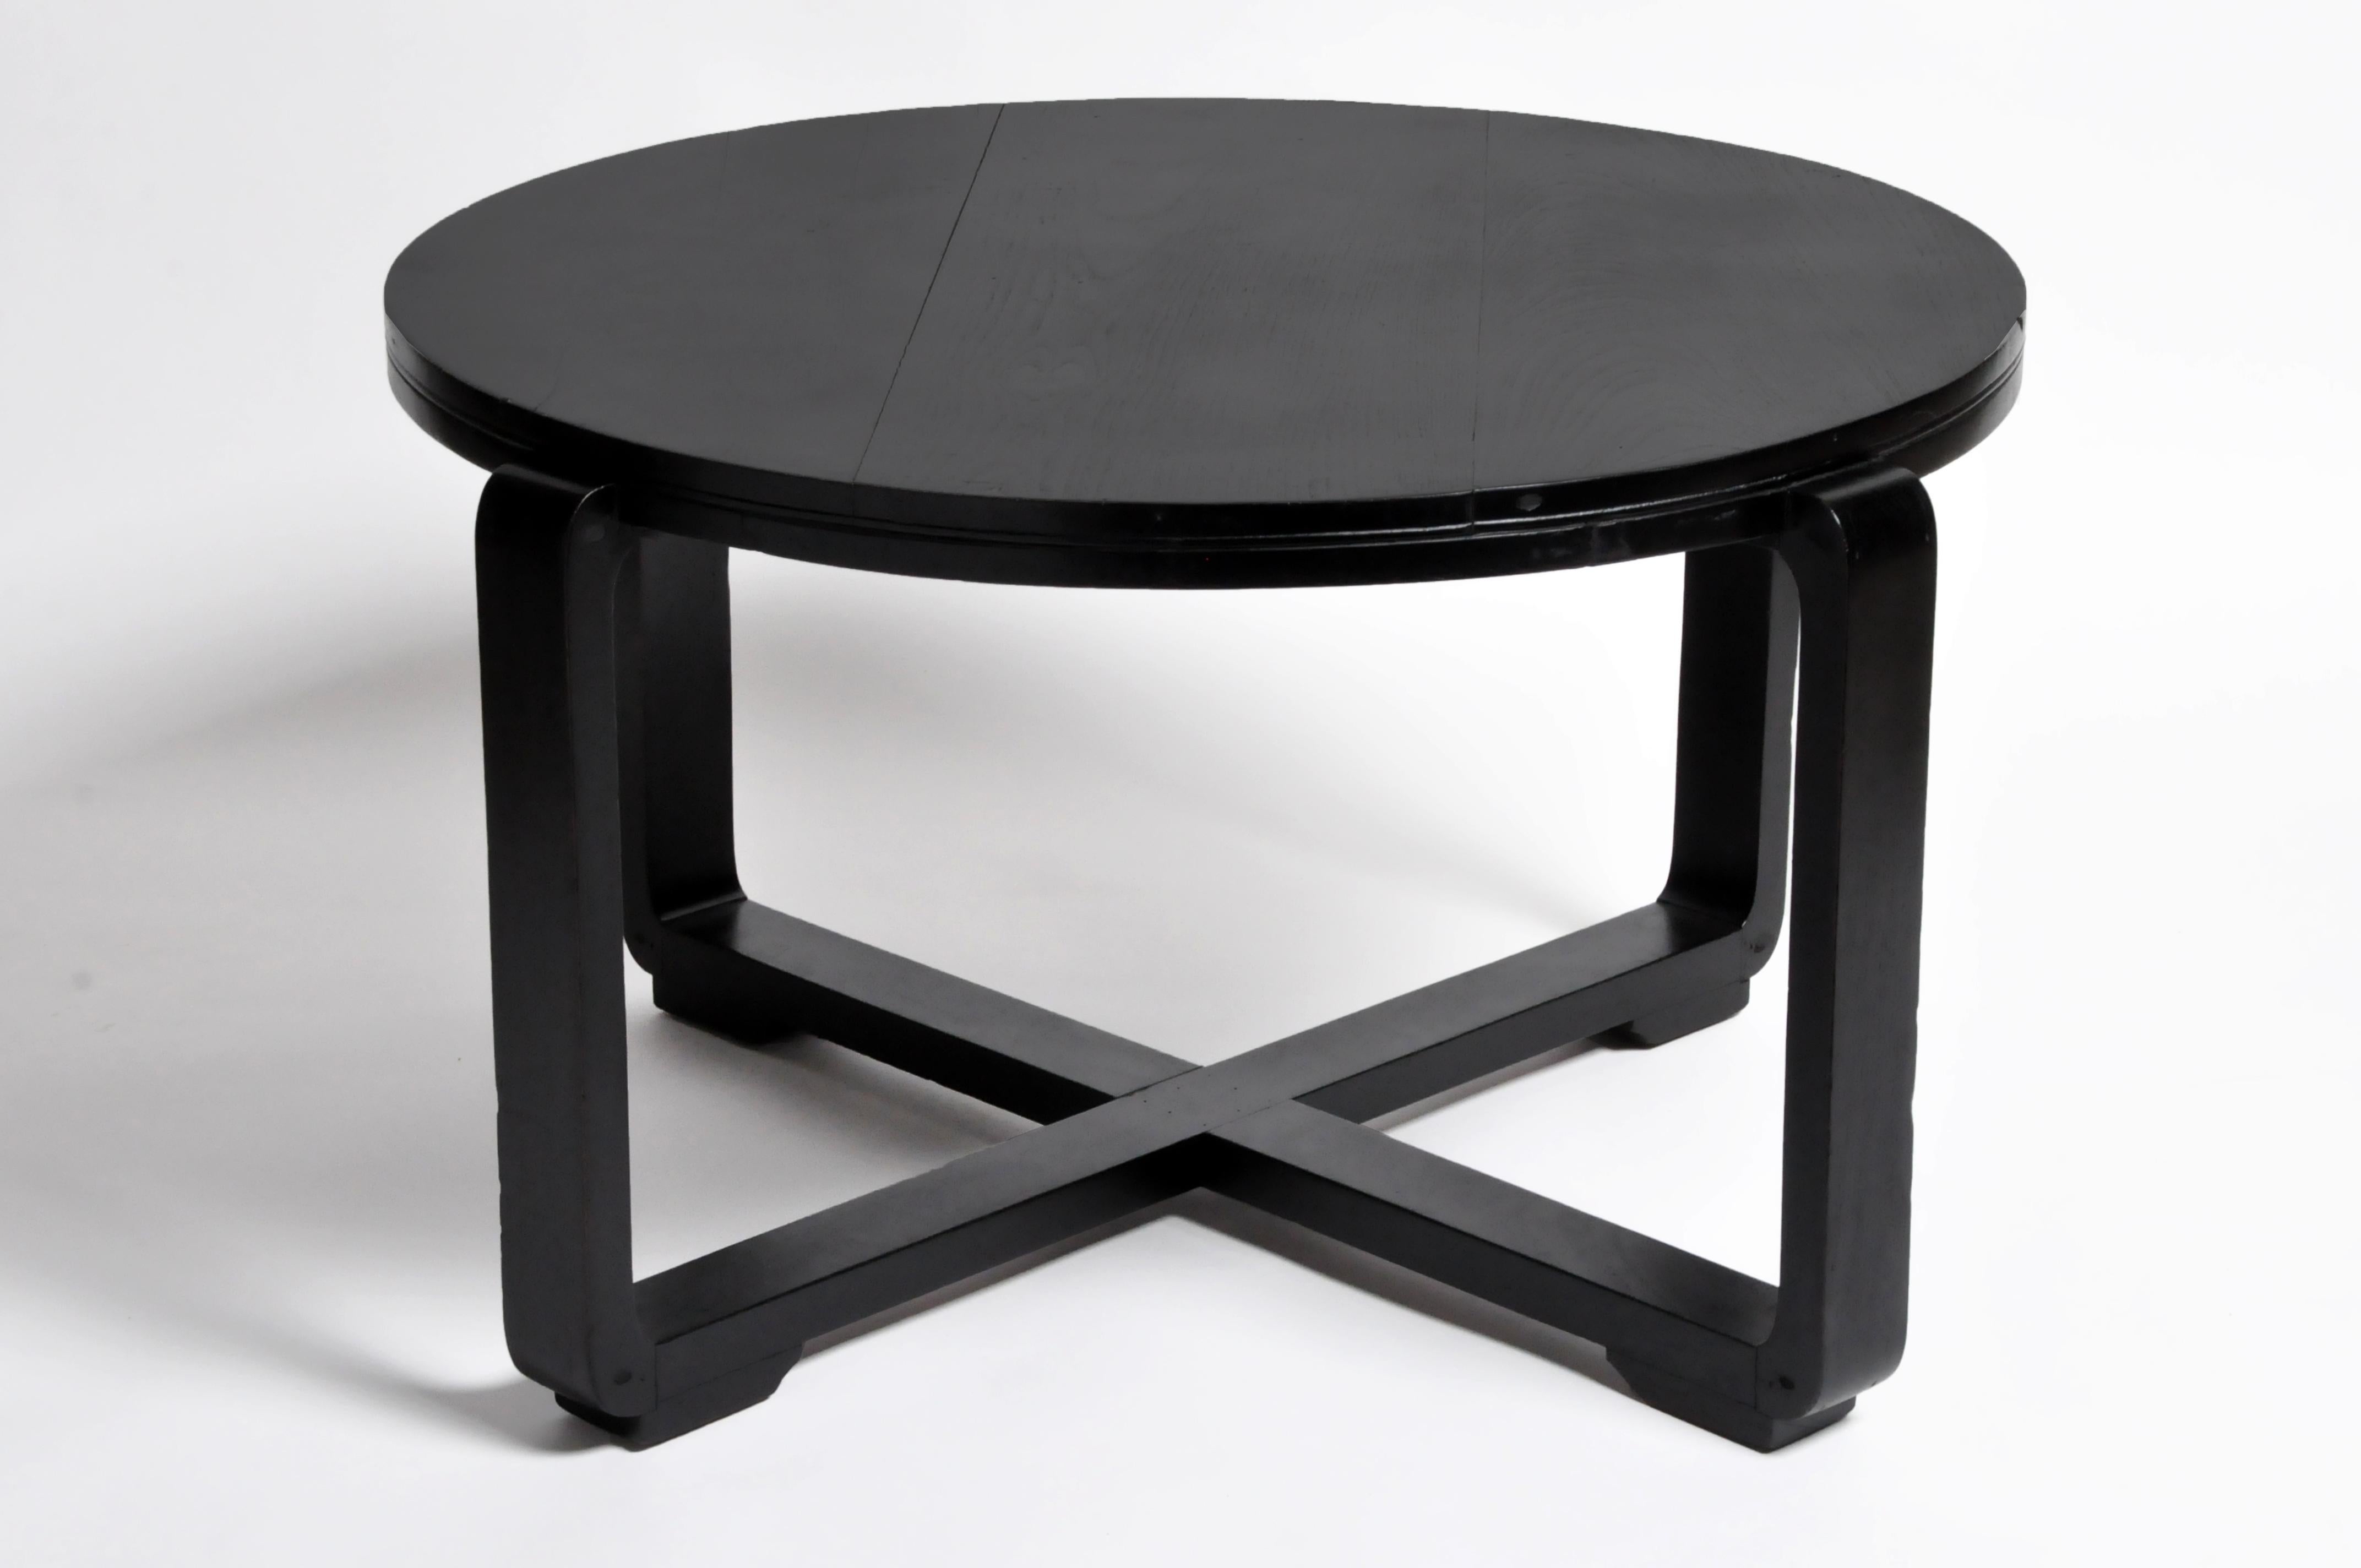 This British Colonial Art Deco round tea table is from Yangon and was made from teak wood, circa 1940. It features a new black lacquer finish with intersecting legs forming an 